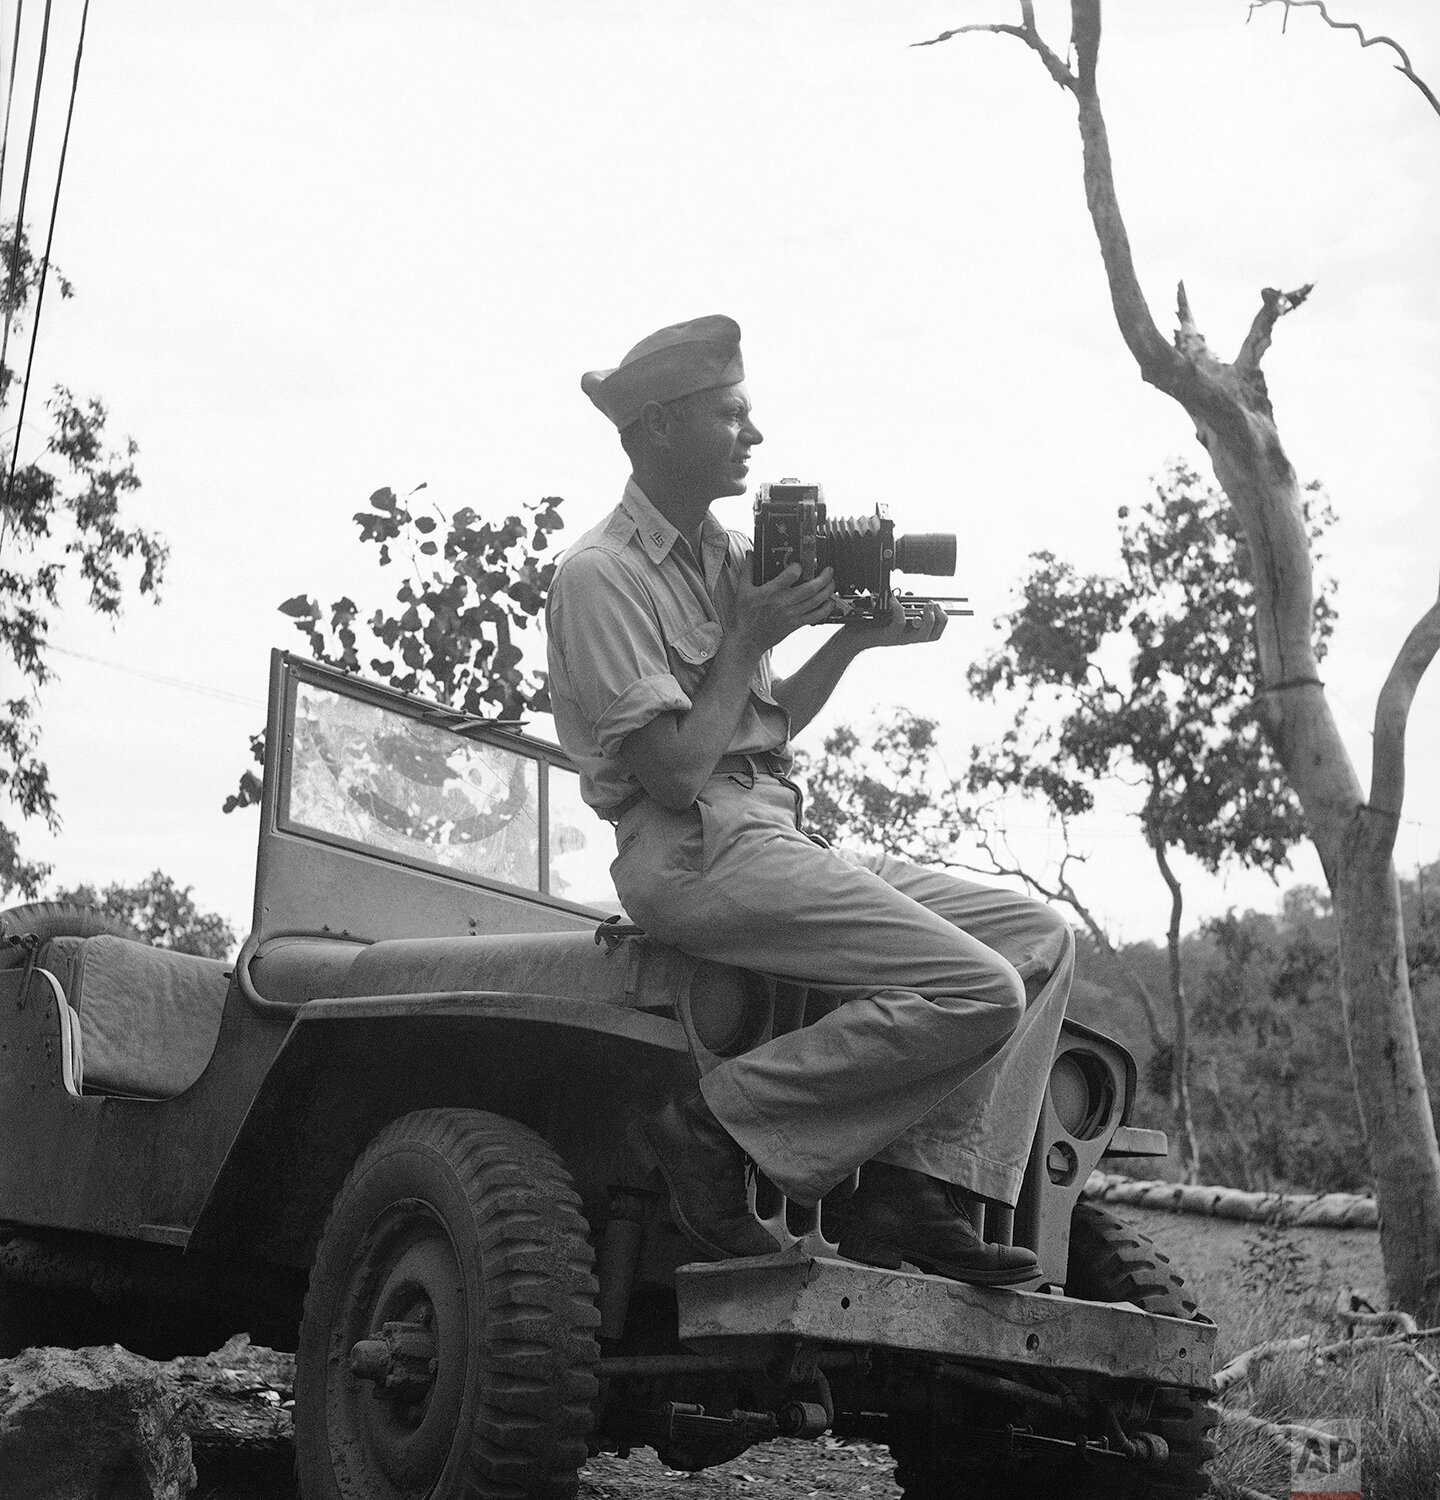  Edward Widdis, Associated Press photographer, sits on top of his “jeep” with his camera ready during the Memorial Day exercises in New Guinea on Sunday, May 30, 1943. (AP Photo) 